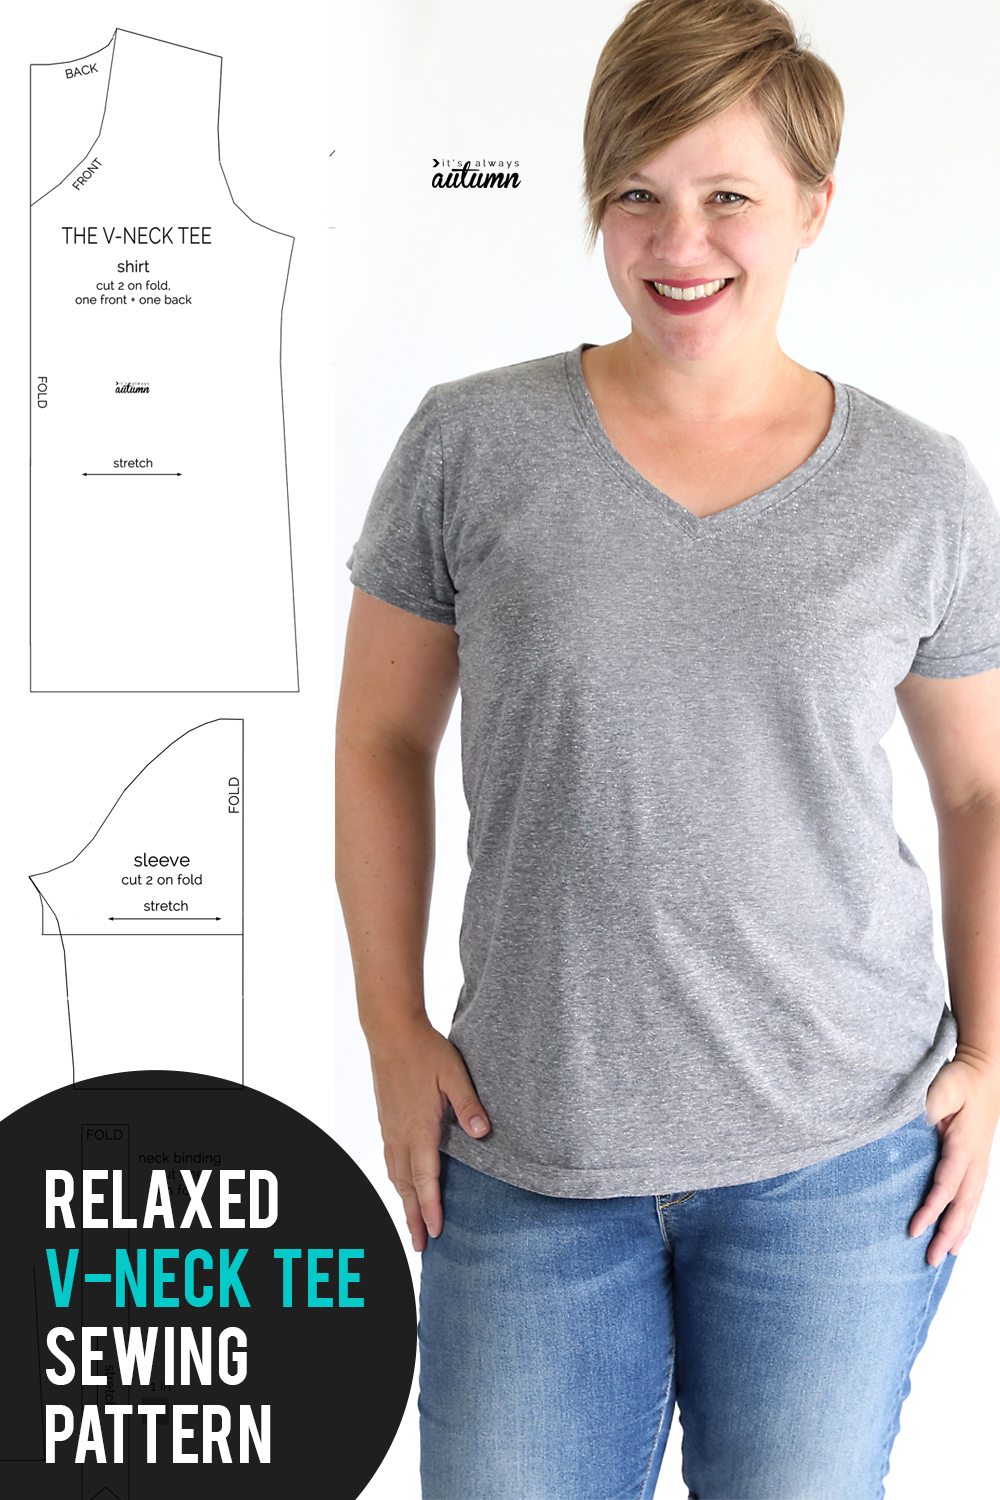 How to Make a Cold Shoulder Top, Easy Beginner Clothing Sewing Project